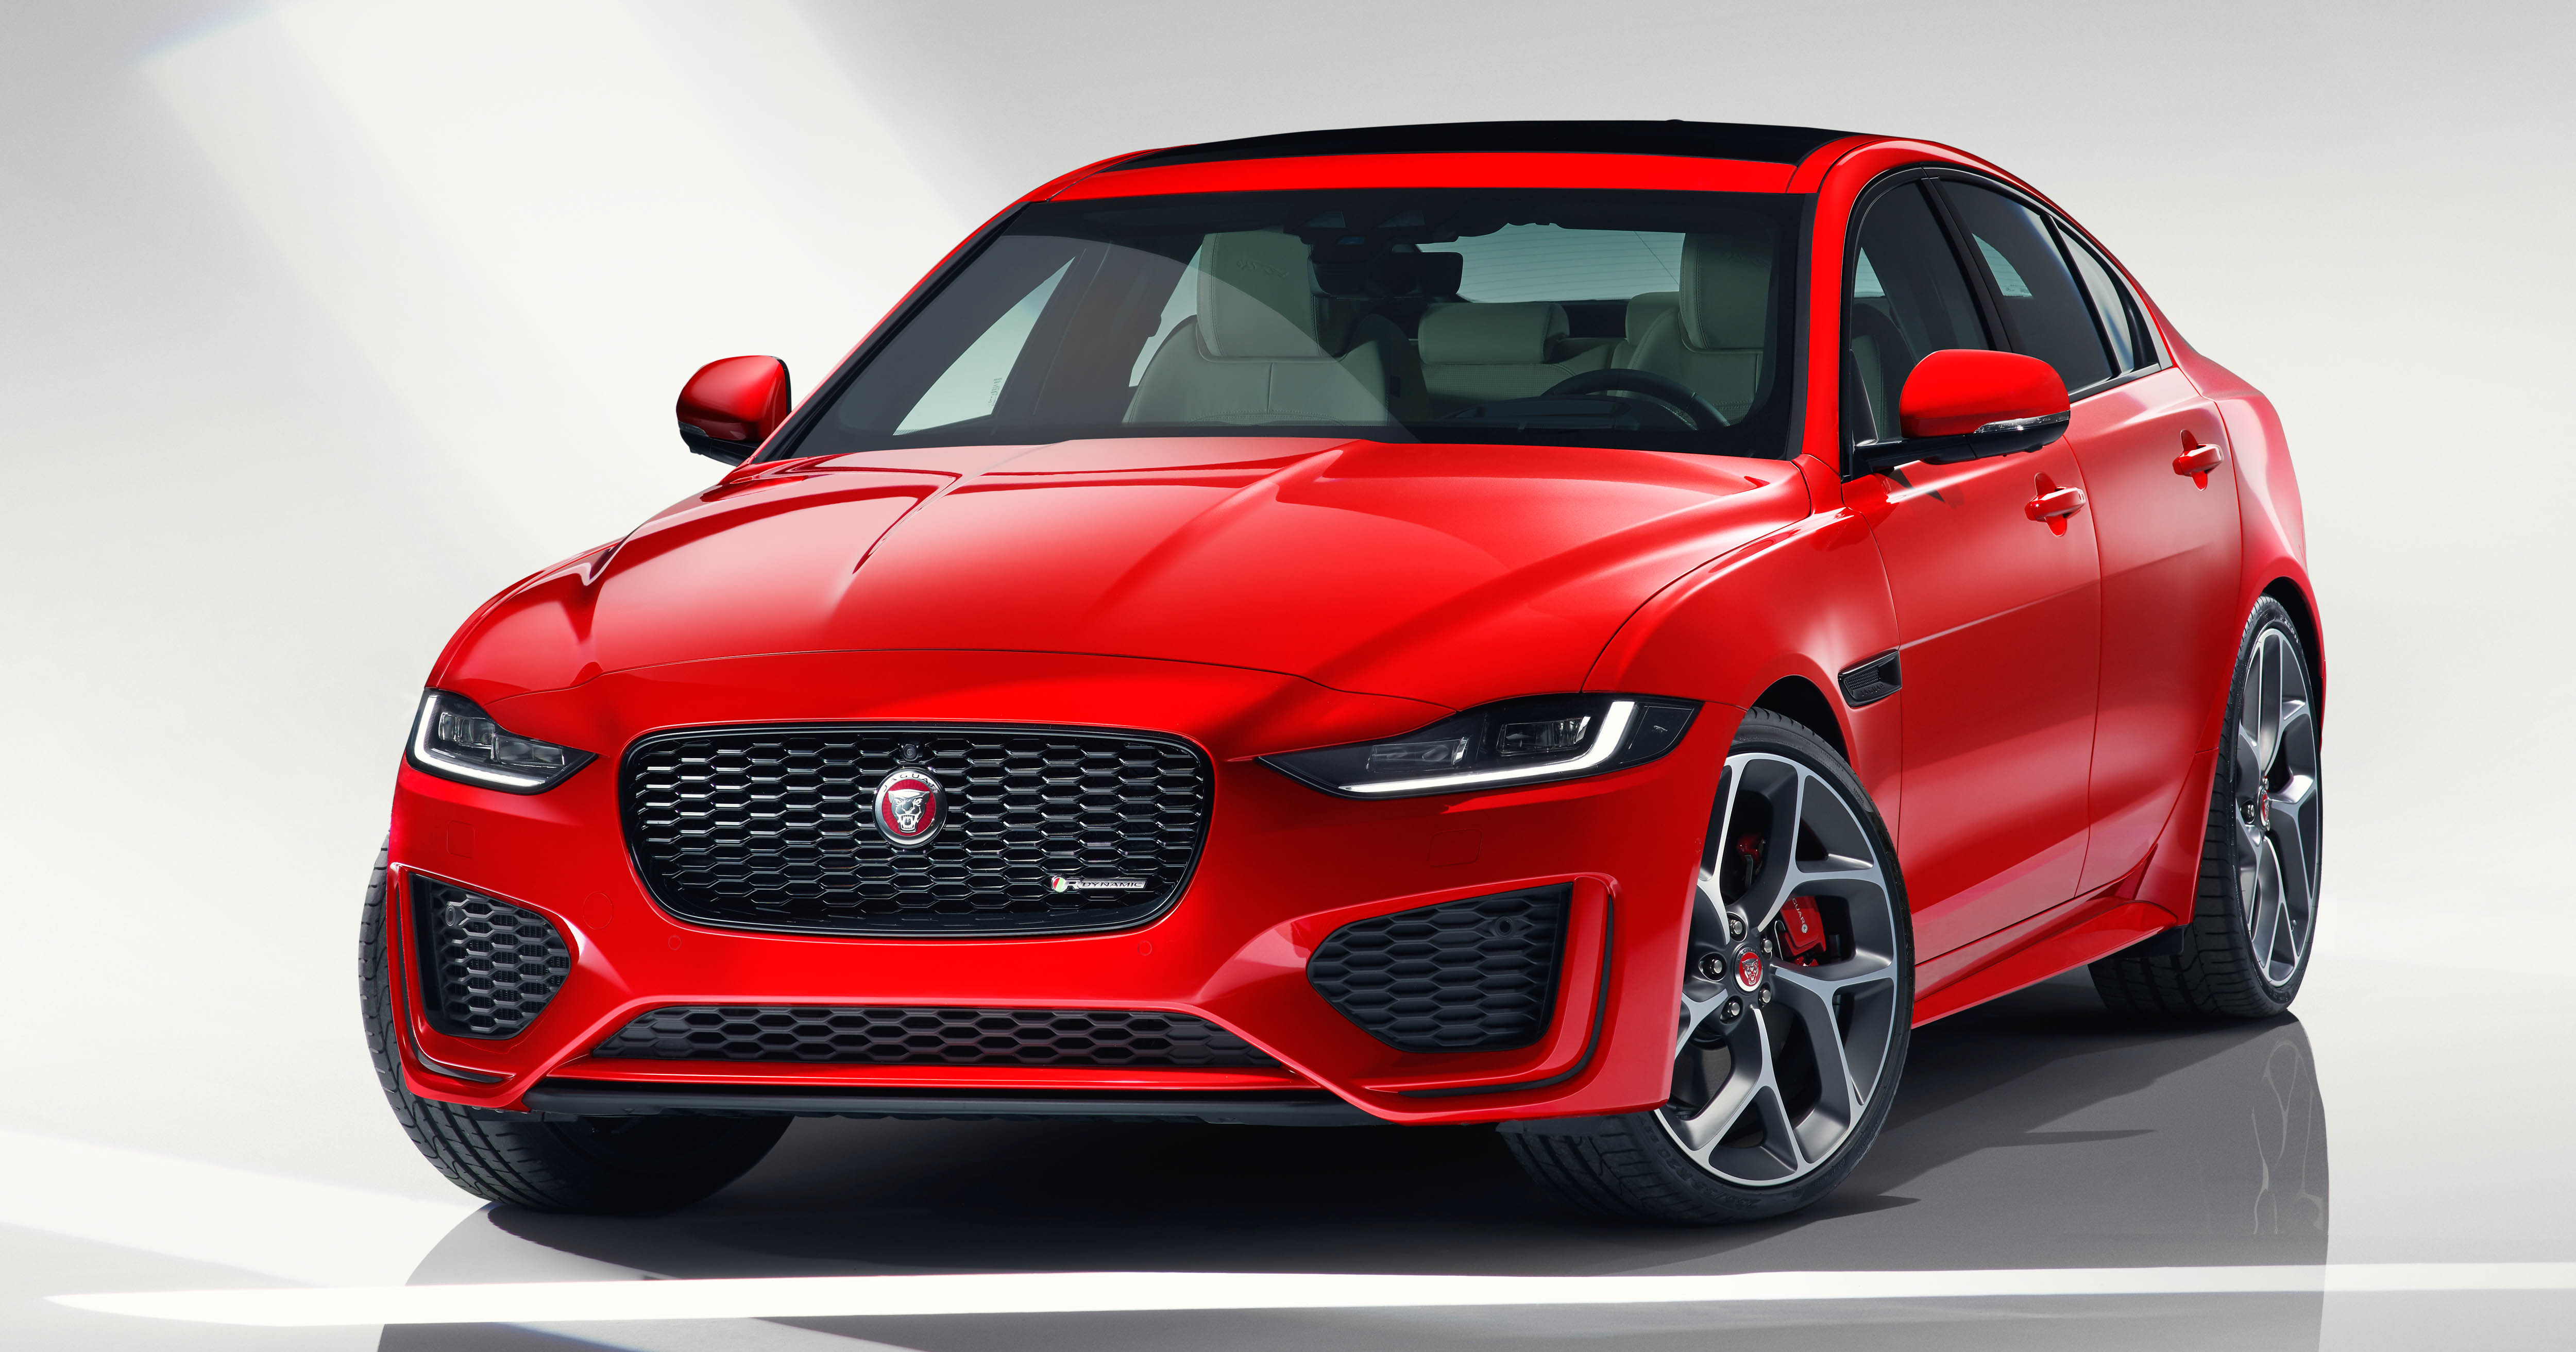 Jaguar XE facelift unveiled with updated styling, tech 